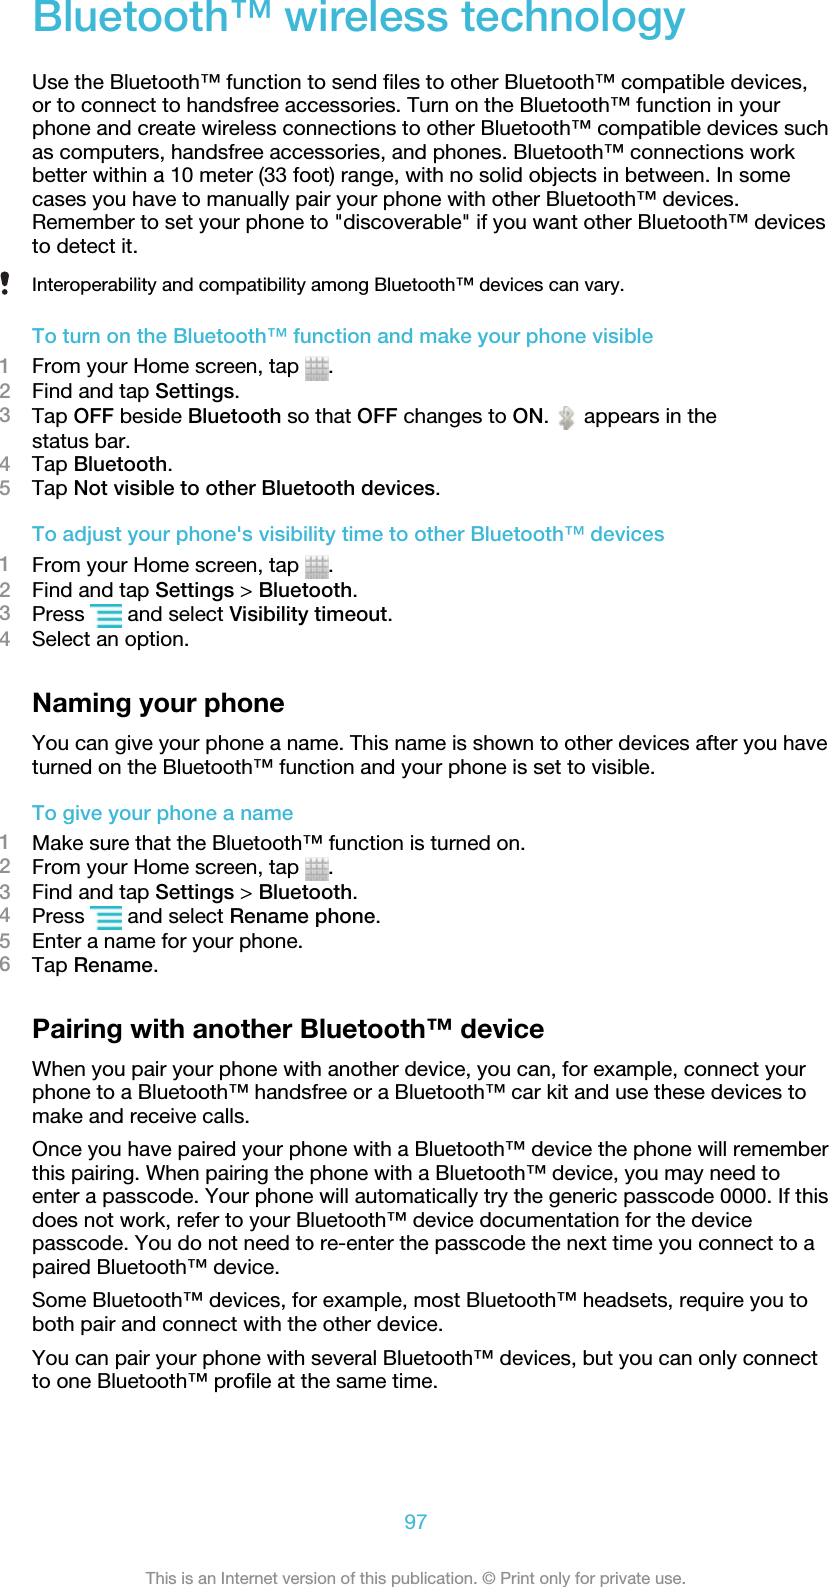 Bluetooth™ wireless technologyUse the Bluetooth™ function to send files to other Bluetooth™ compatible devices,or to connect to handsfree accessories. Turn on the Bluetooth™ function in yourphone and create wireless connections to other Bluetooth™ compatible devices suchas computers, handsfree accessories, and phones. Bluetooth™ connections workbetter within a 10 meter (33 foot) range, with no solid objects in between. In somecases you have to manually pair your phone with other Bluetooth™ devices.Remember to set your phone to &quot;discoverable&quot; if you want other Bluetooth™ devicesto detect it.Interoperability and compatibility among Bluetooth™ devices can vary.To turn on the Bluetooth™ function and make your phone visible1From your Home screen, tap  .2Find and tap Settings.3Tap OFF beside Bluetooth so that OFF changes to ON.   appears in thestatus bar.4Tap Bluetooth.5Tap Not visible to other Bluetooth devices.To adjust your phone&apos;s visibility time to other Bluetooth™ devices1From your Home screen, tap  .2Find and tap Settings &gt; Bluetooth.3Press   and select Visibility timeout.4Select an option.Naming your phoneYou can give your phone a name. This name is shown to other devices after you haveturned on the Bluetooth™ function and your phone is set to visible.To give your phone a name1Make sure that the Bluetooth™ function is turned on.2From your Home screen, tap  .3Find and tap Settings &gt; Bluetooth.4Press   and select Rename phone.5Enter a name for your phone.6Tap Rename.Pairing with another Bluetooth™ deviceWhen you pair your phone with another device, you can, for example, connect yourphone to a Bluetooth™ handsfree or a Bluetooth™ car kit and use these devices tomake and receive calls.Once you have paired your phone with a Bluetooth™ device the phone will rememberthis pairing. When pairing the phone with a Bluetooth™ device, you may need toenter a passcode. Your phone will automatically try the generic passcode 0000. If thisdoes not work, refer to your Bluetooth™ device documentation for the devicepasscode. You do not need to re-enter the passcode the next time you connect to apaired Bluetooth™ device.Some Bluetooth™ devices, for example, most Bluetooth™ headsets, require you toboth pair and connect with the other device.You can pair your phone with several Bluetooth™ devices, but you can only connectto one Bluetooth™ profile at the same time.97This is an Internet version of this publication. © Print only for private use.